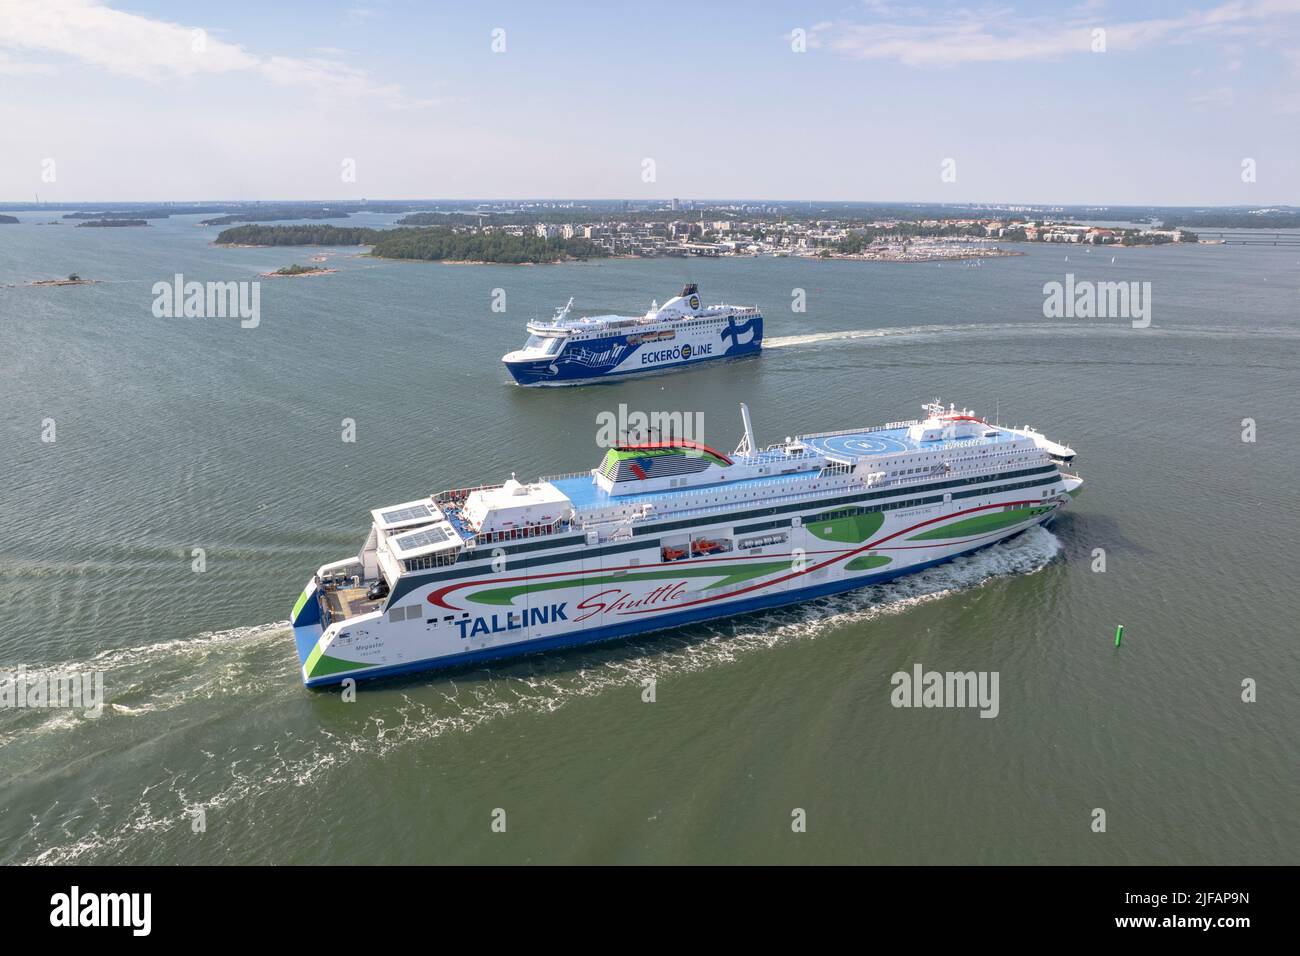 Tallink and Eckerö Line ferries meet on their way to and from Tallinn, Estonia Stock Photo